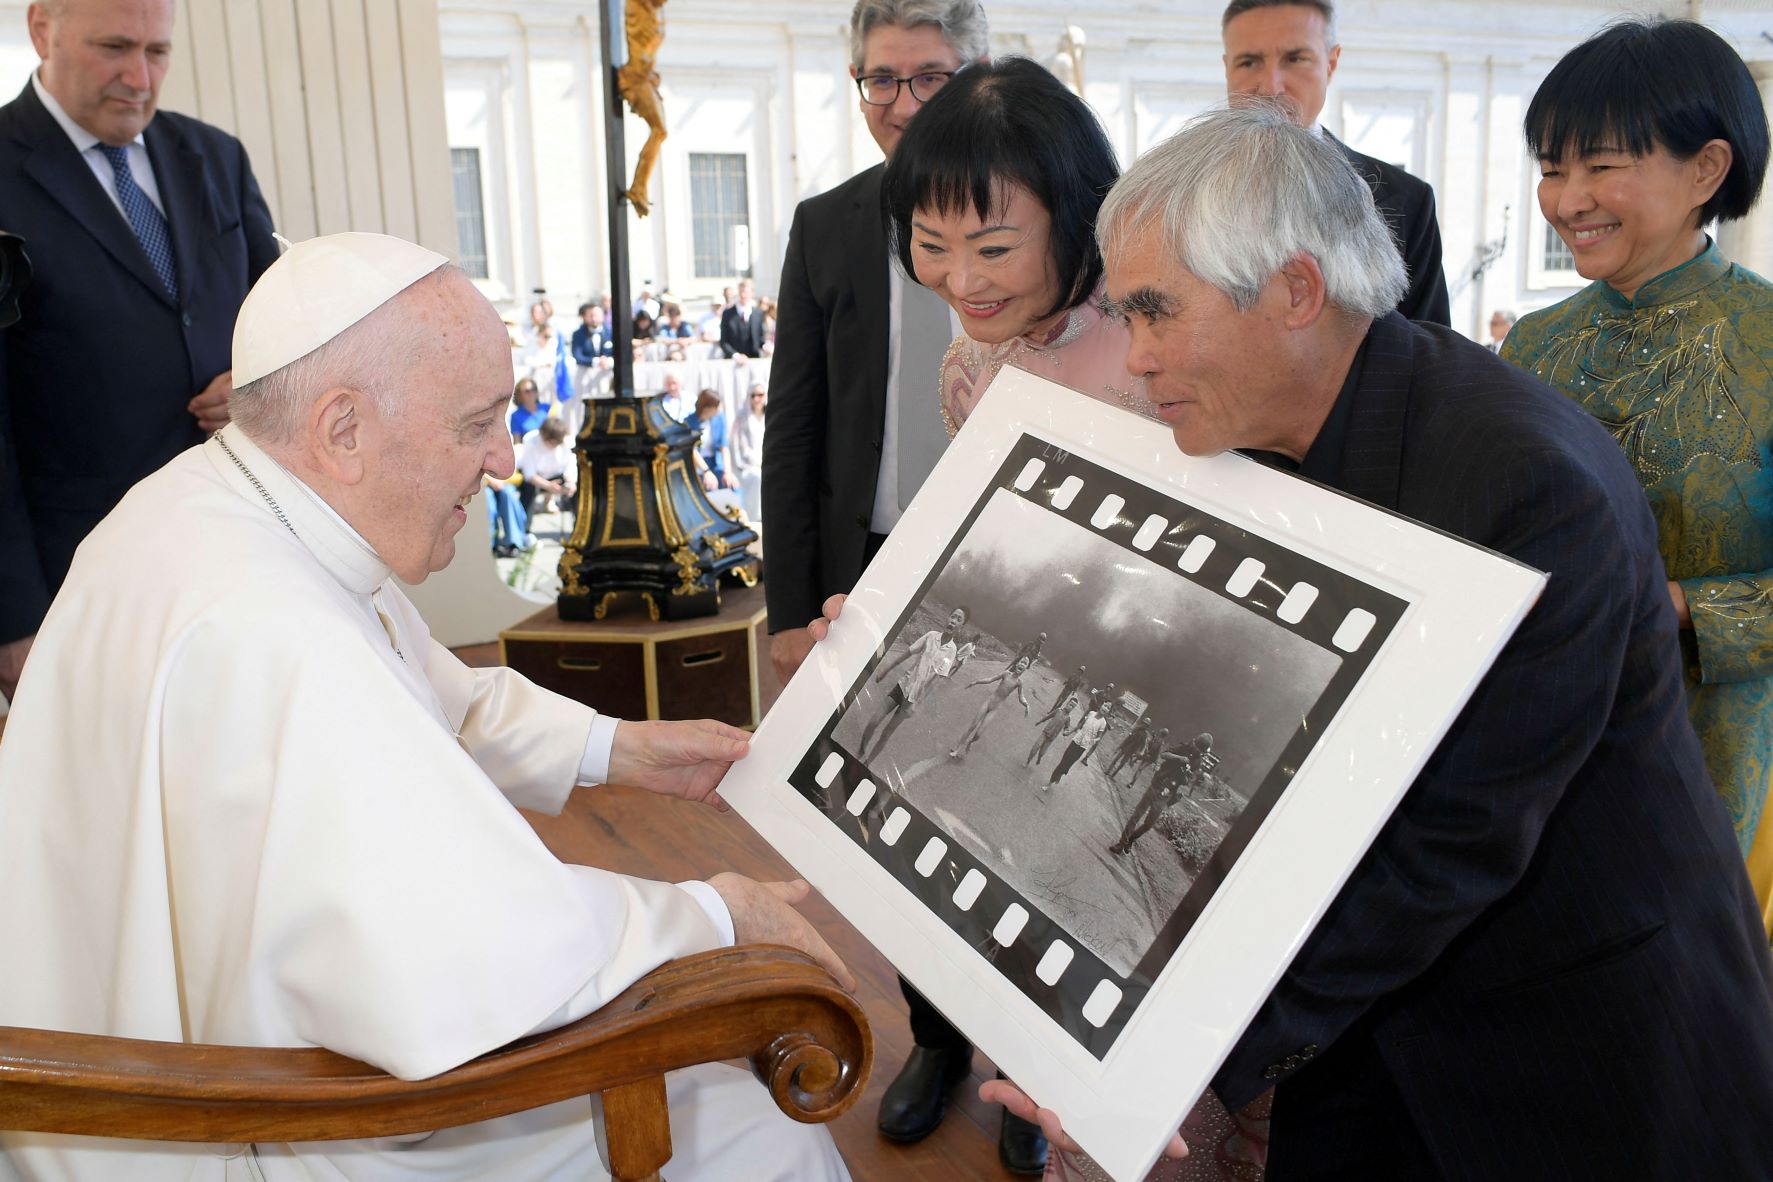 Retired AP photographer gives Pope ‘Napalm Girl’ photo